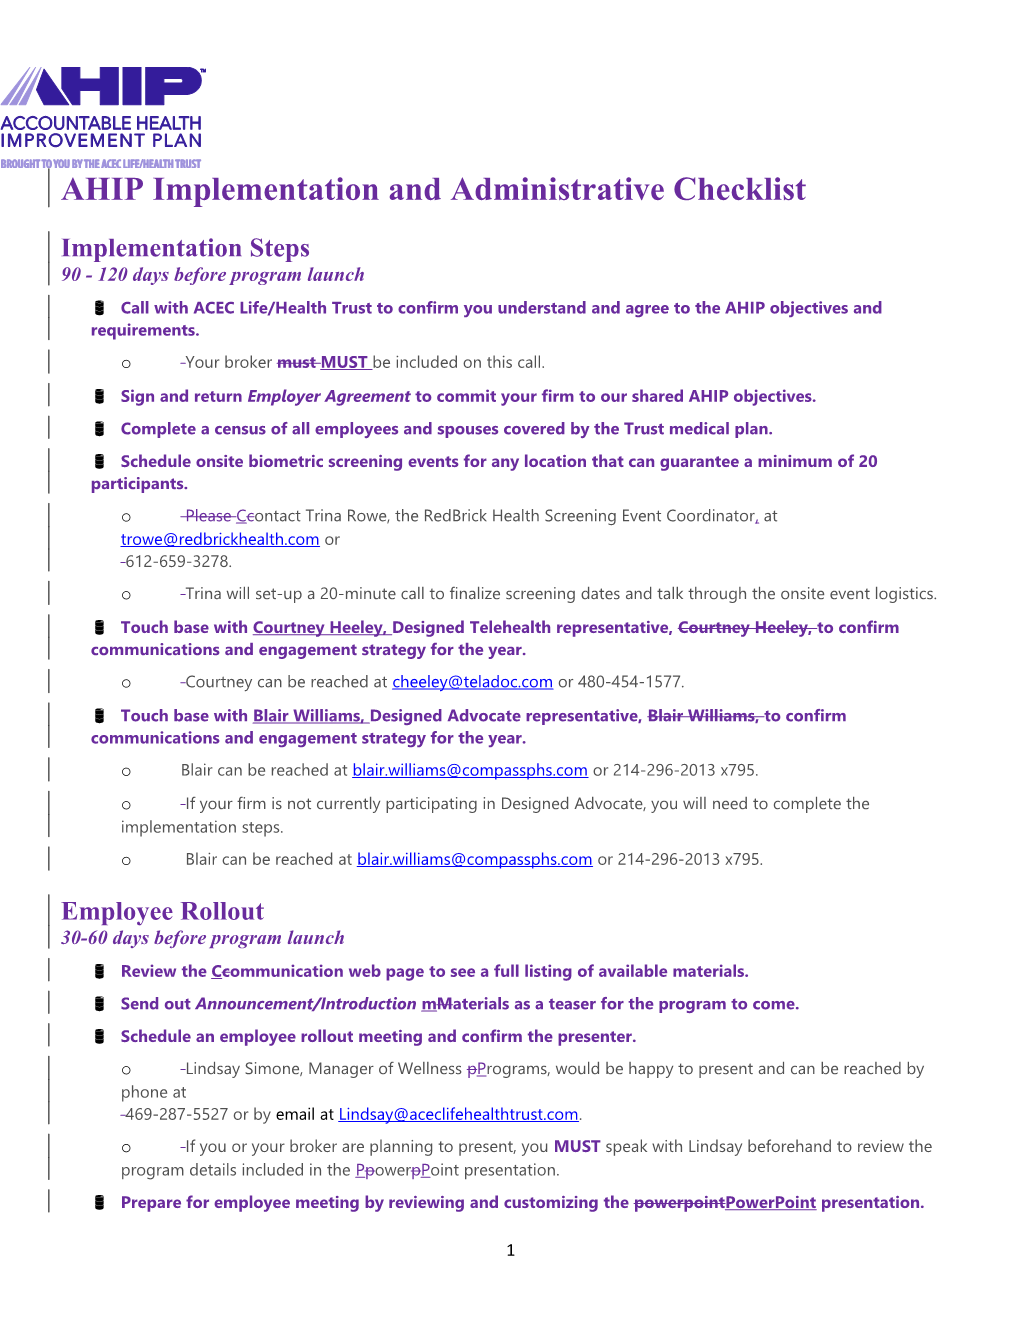 AHIP Implementation and Administrative Checklist